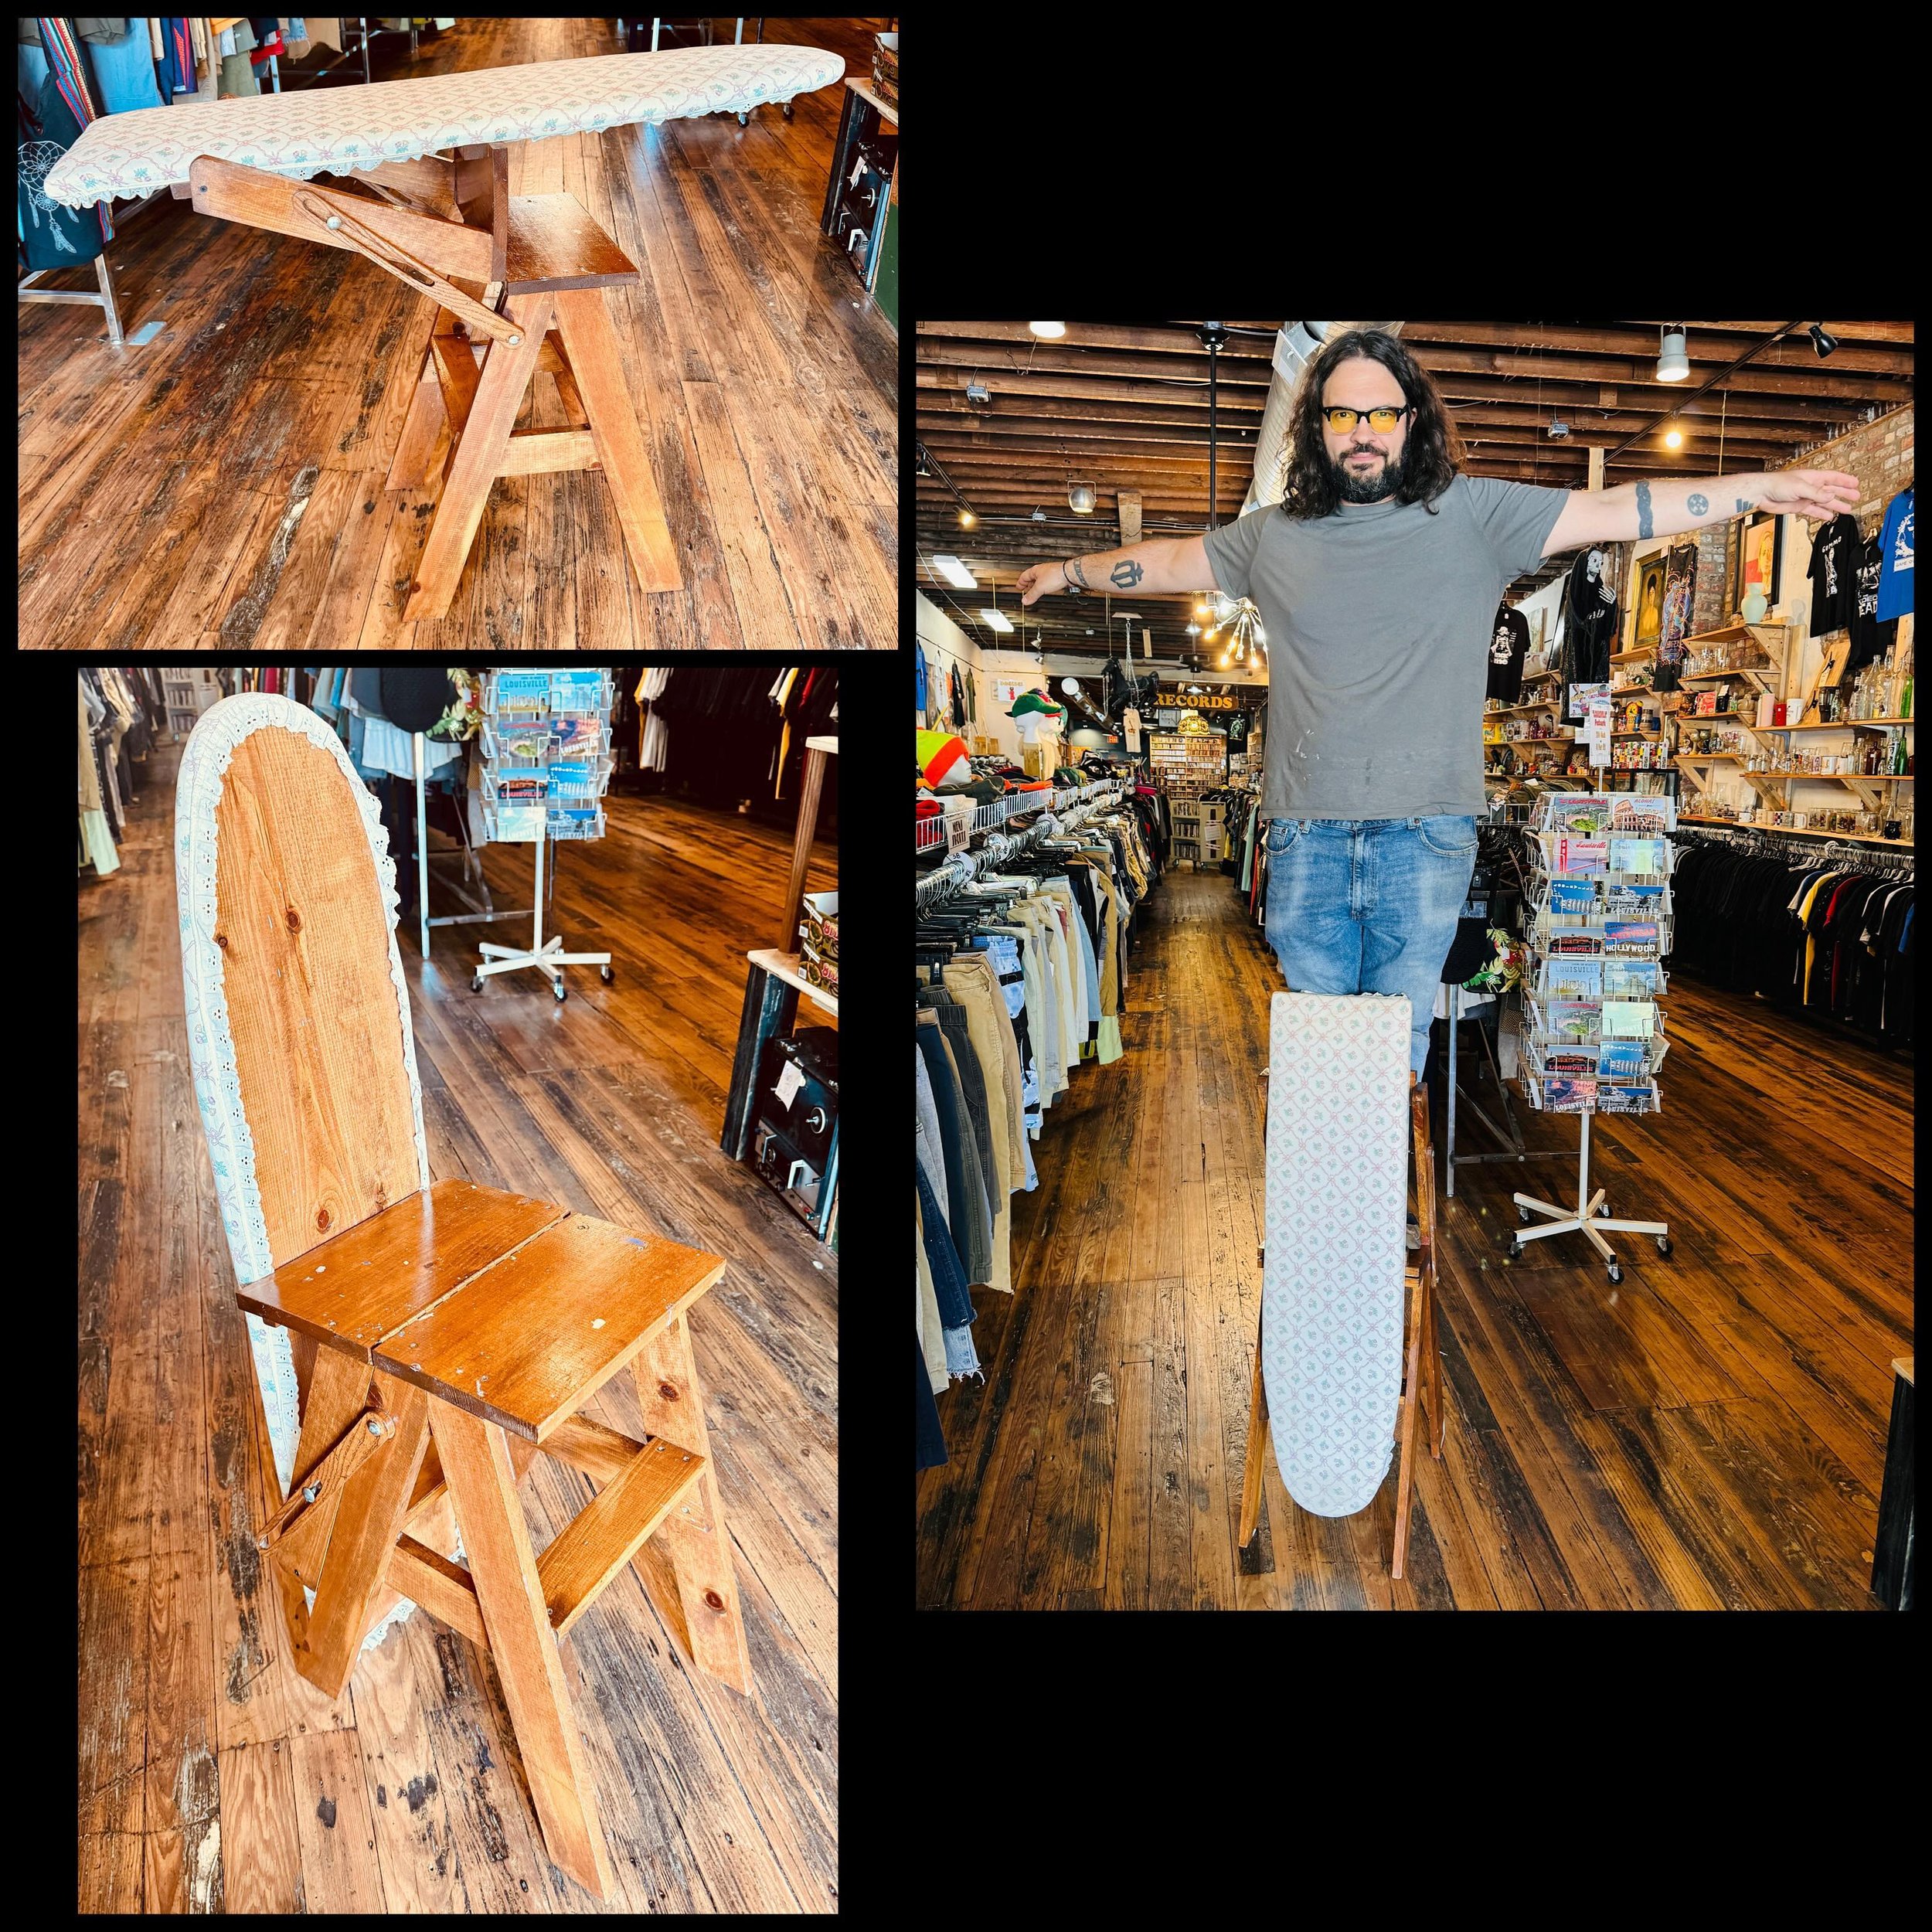 Combination chair, step stool, and ironing board for your old-timey studio apartment. Pardon my christ-ing. $24!
#fatrabbitky #why #vintagedoodad